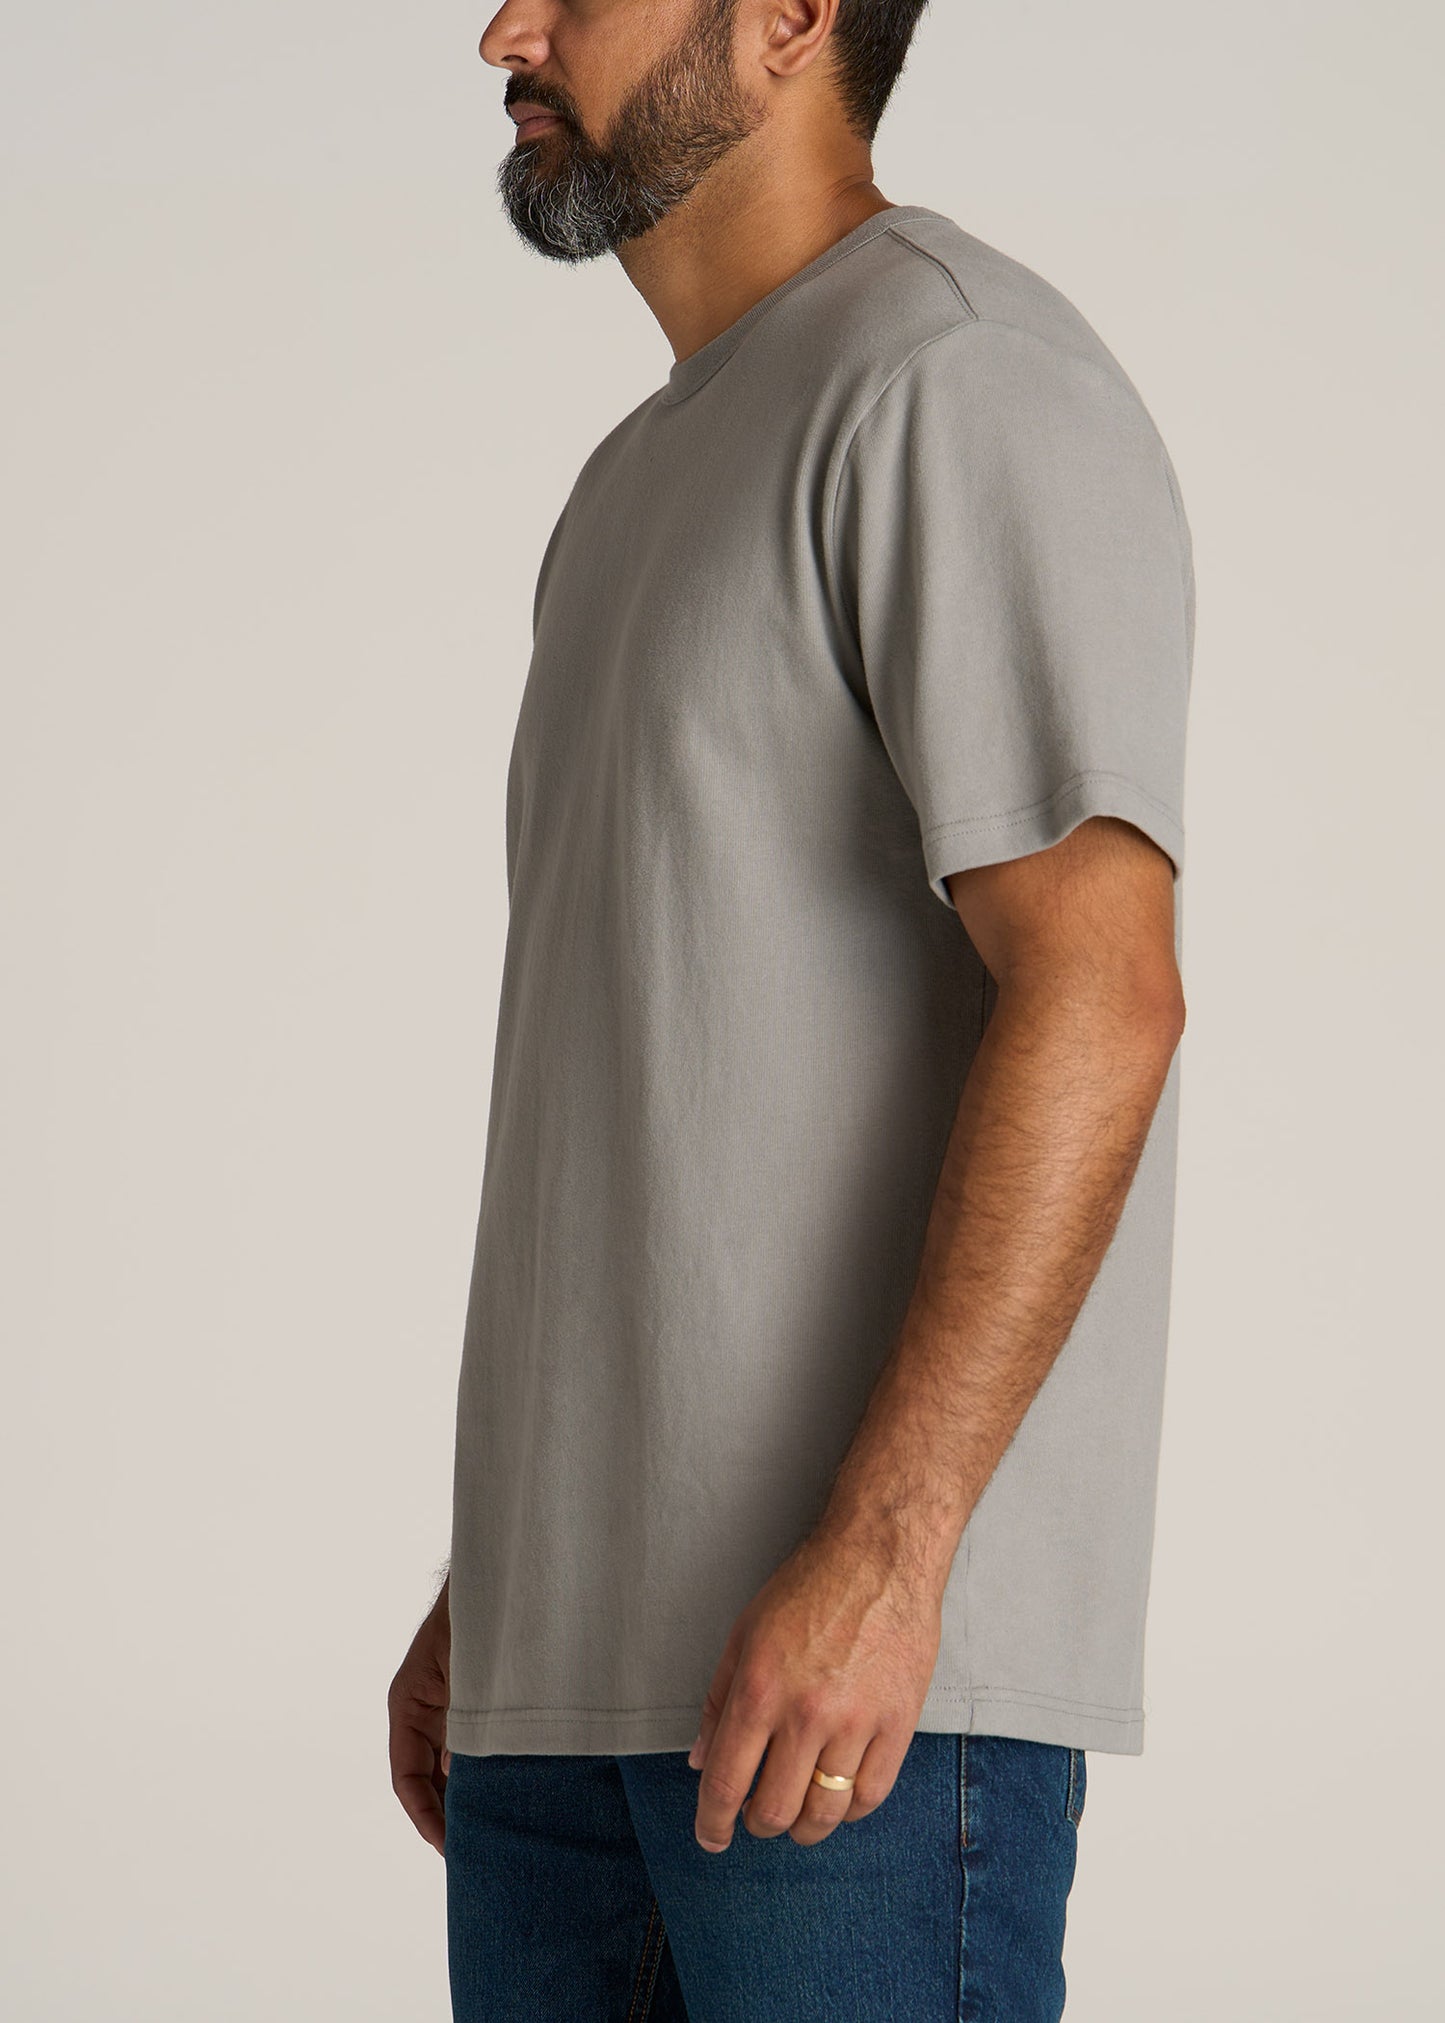 LJ-Pigment-Dyed-Heavyweight-Tee-Pewter-side